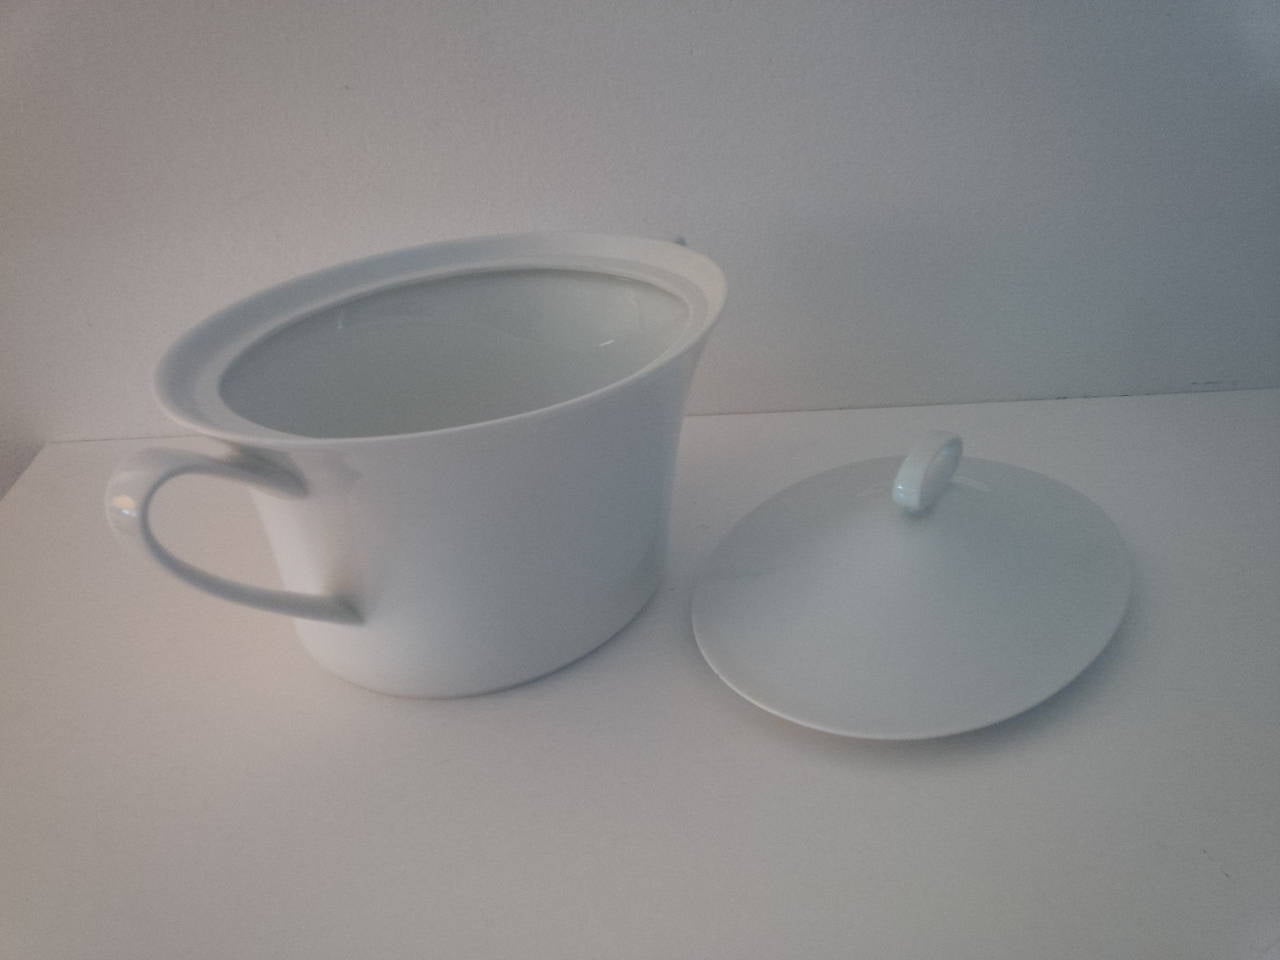 Modernist Covered Casserole Dish by Rosenthal Studio-Line.  Germany, circa 1970. Pure white porcelain.  Removable cover.